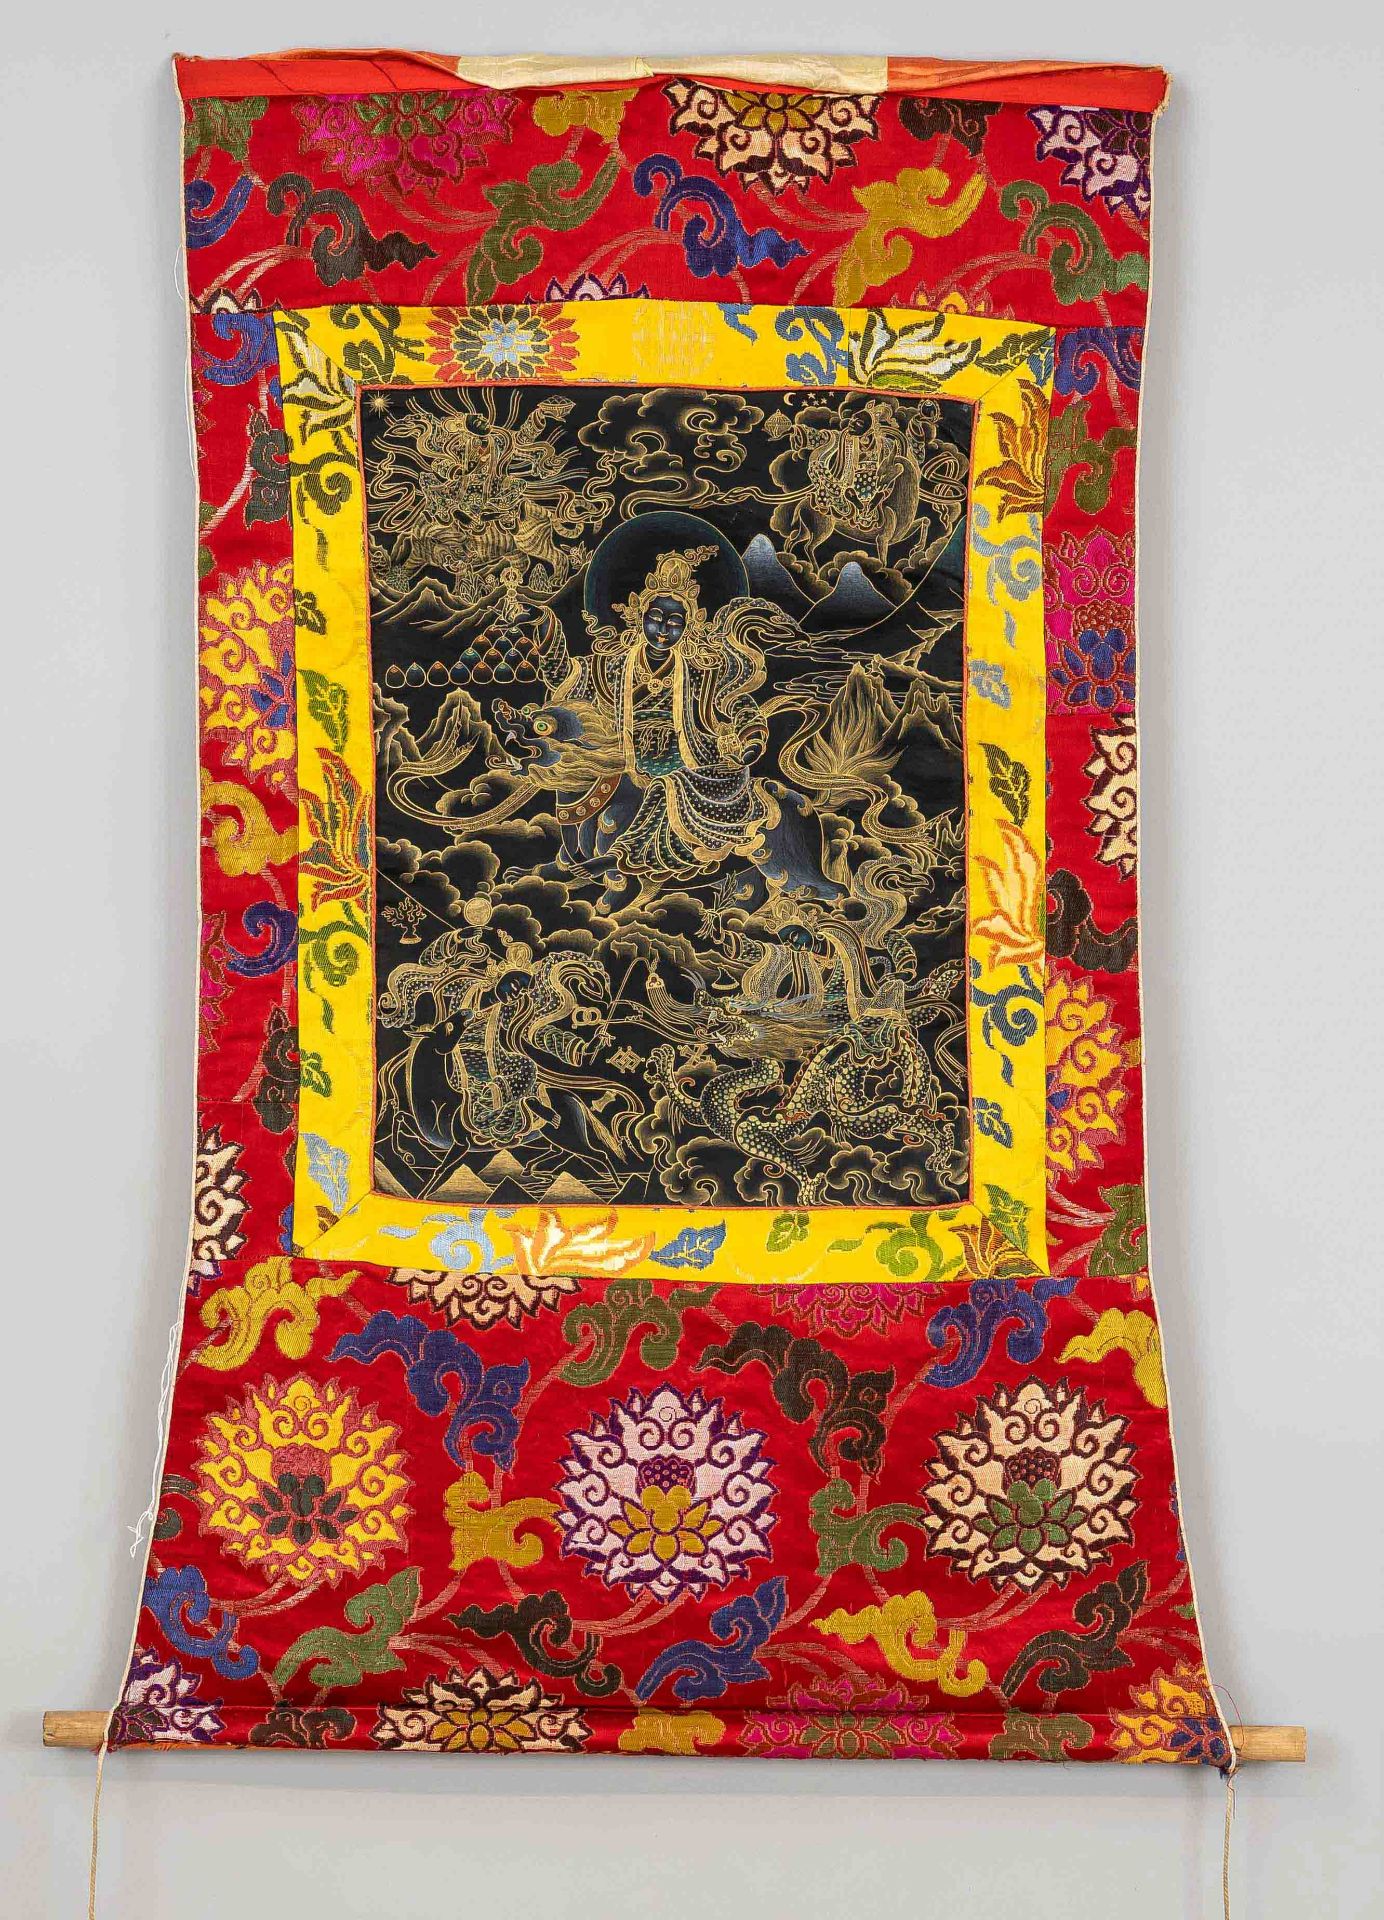 Thangka, probably Nepal, 20th c., silver and gold paint on paper, 5 dakinis on horseback in misty